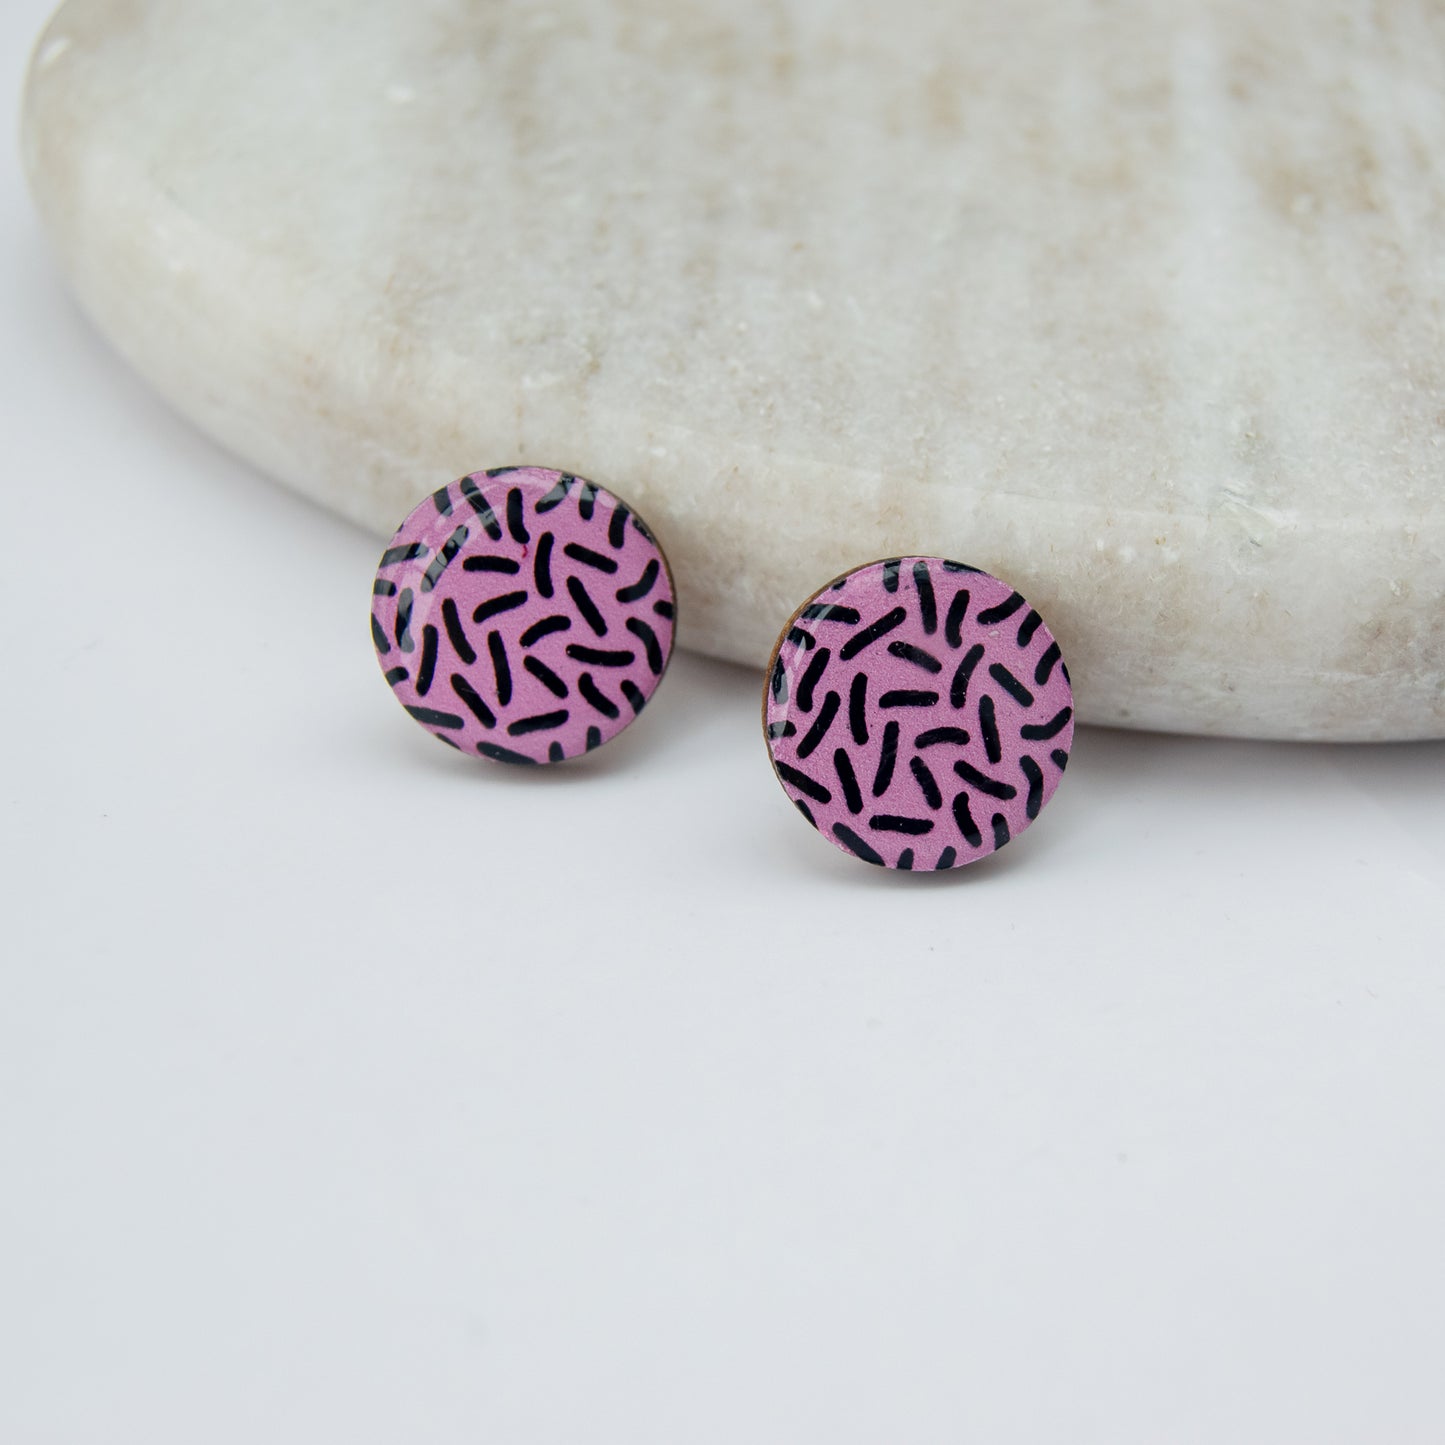 16 mm wooden stud earrings with a nice print